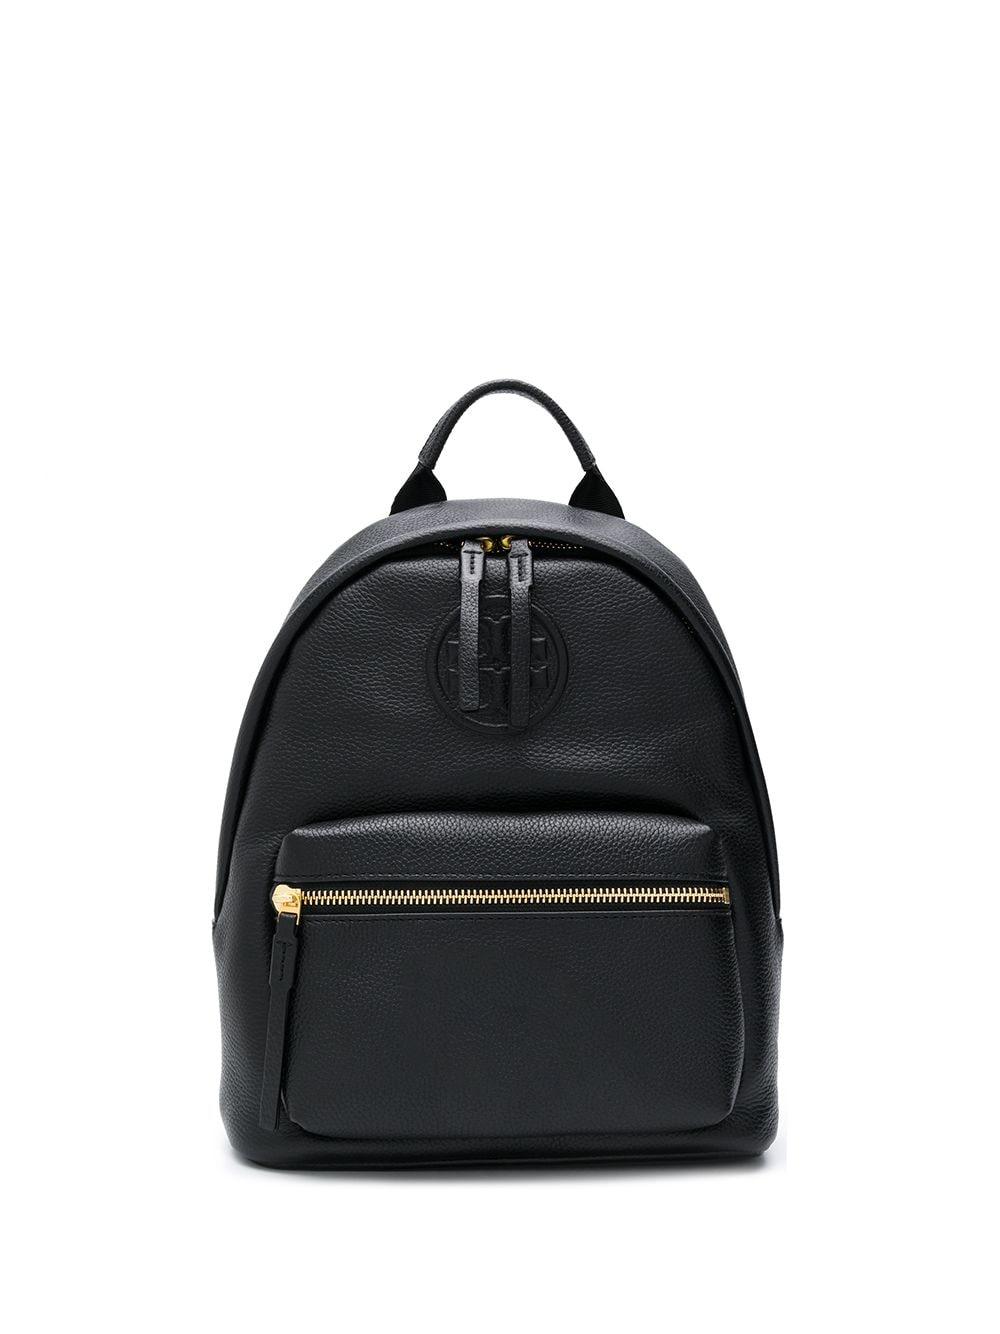 sense Dignified gear Tory Burch Small Perry Bombe Black Leather Backpack | Lyst Australia